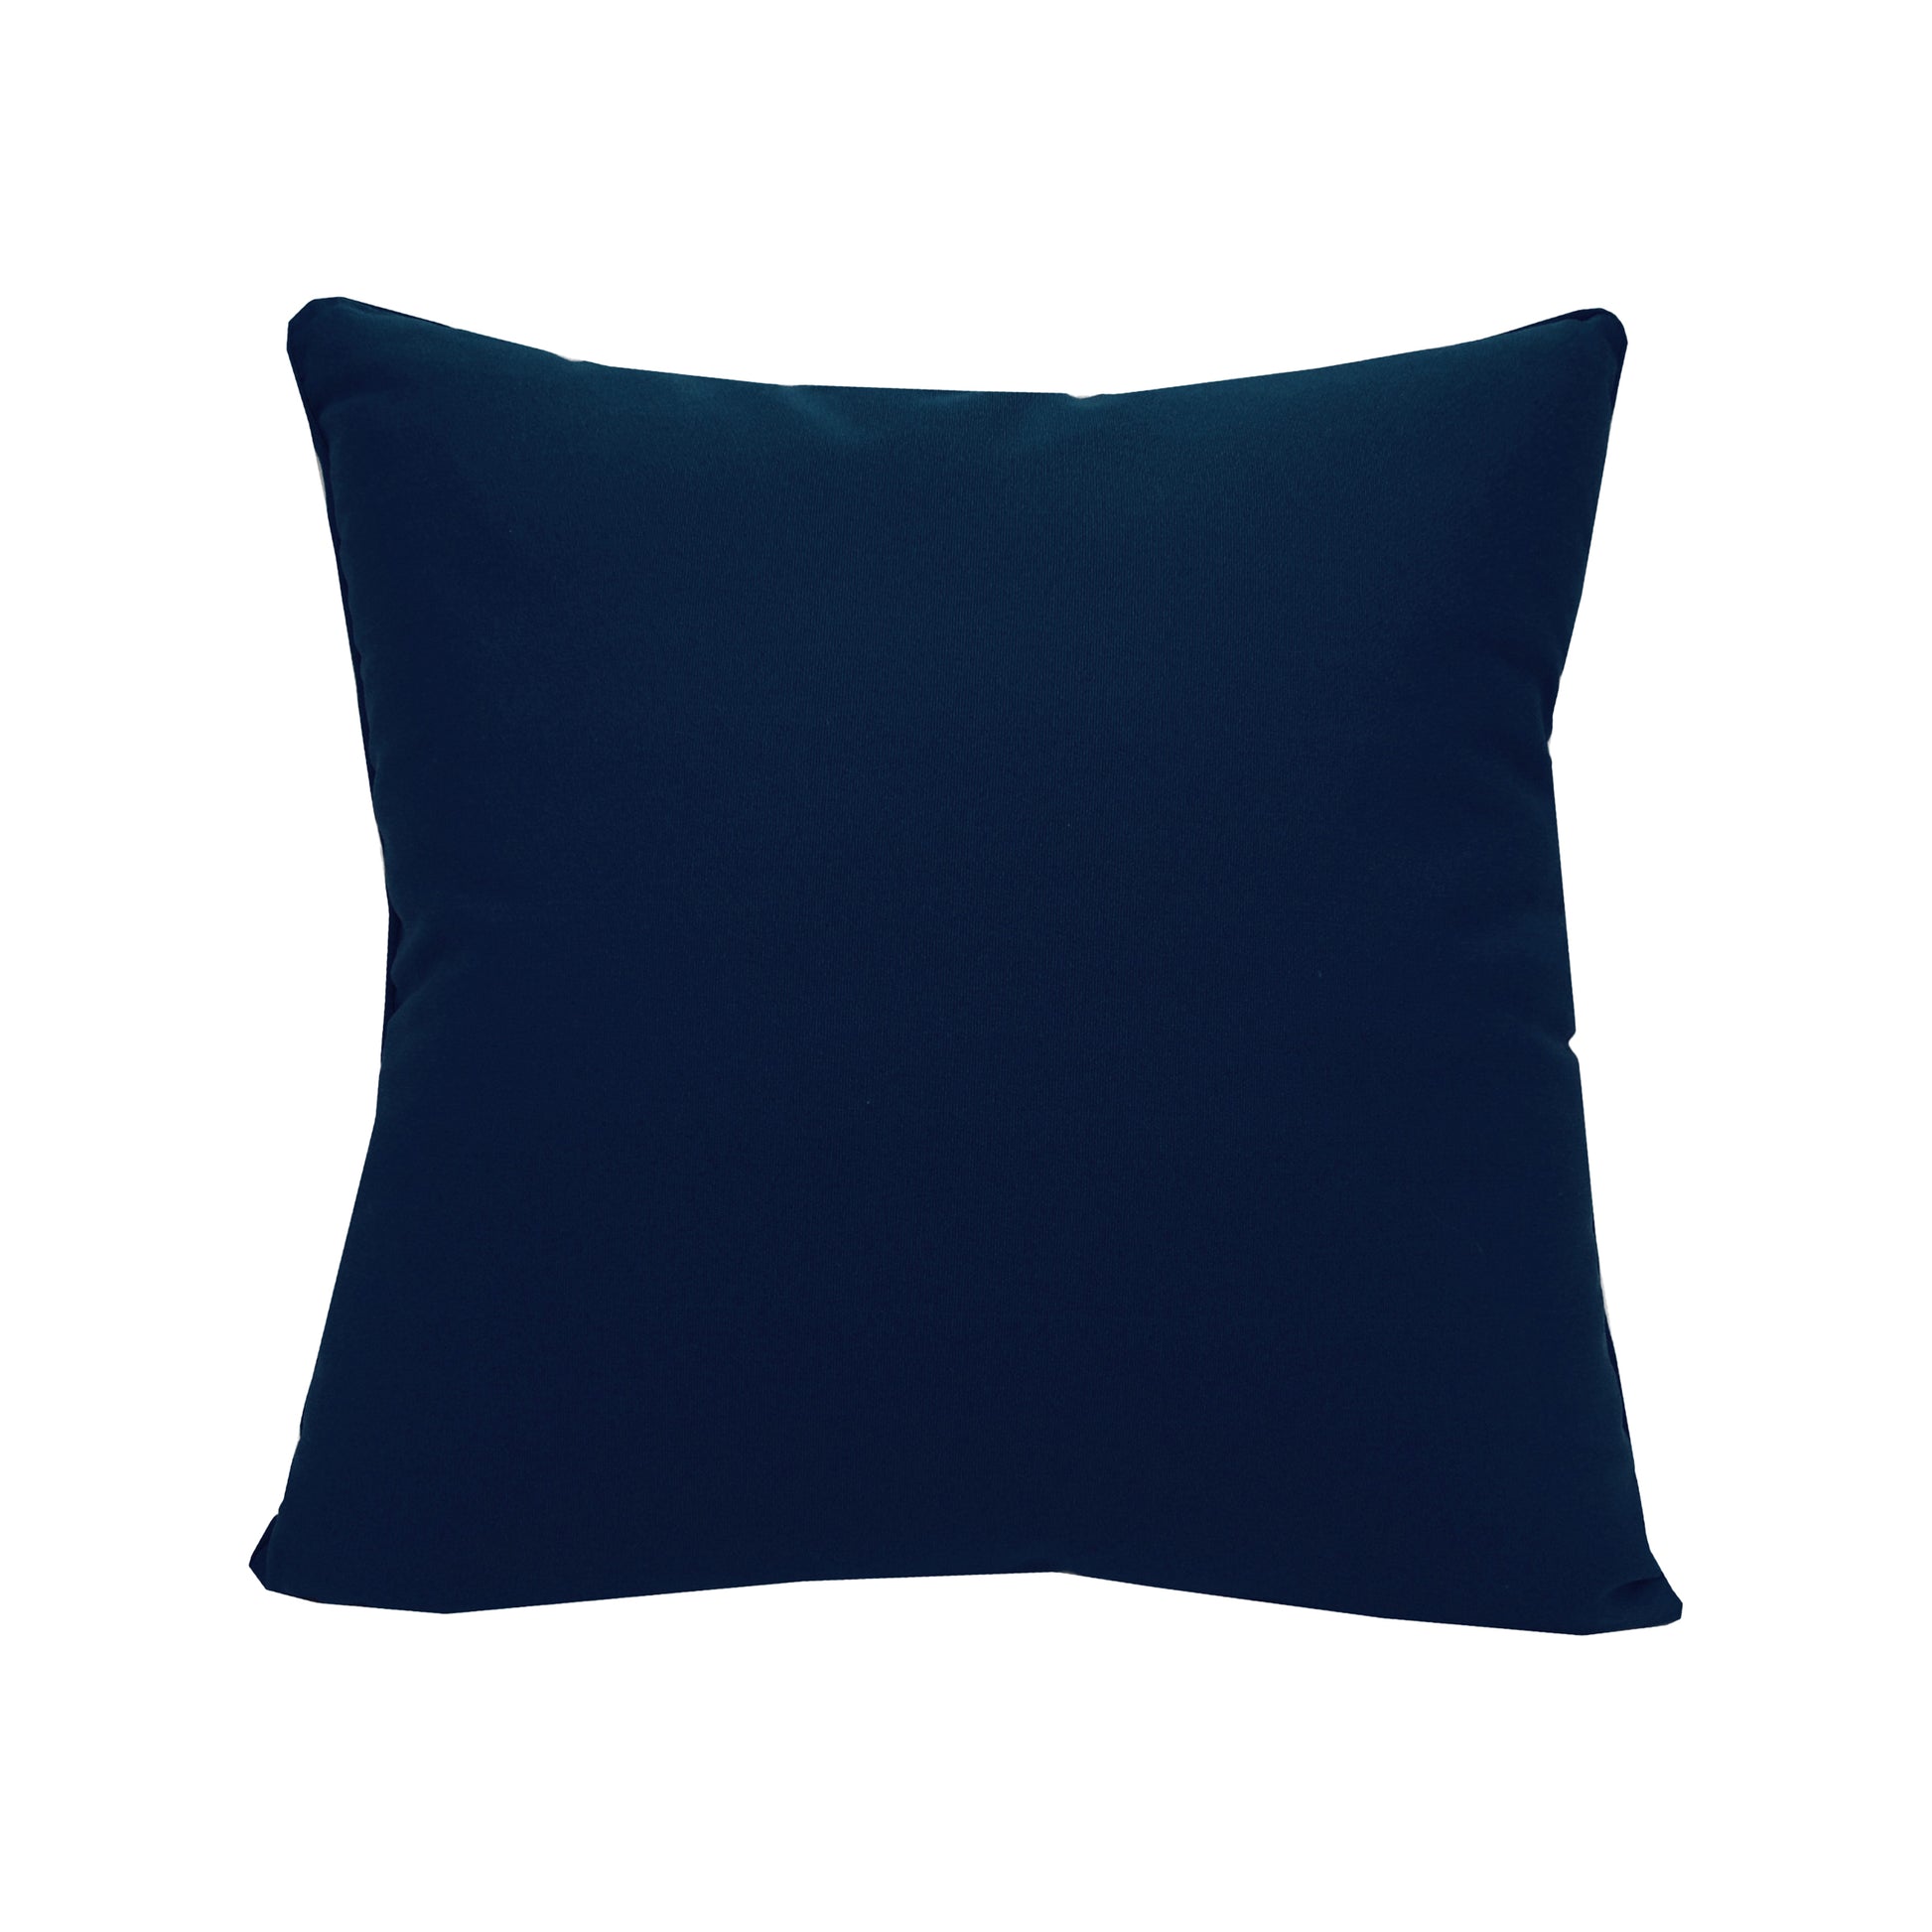 Solid navy fabric; back of the Rope Lattice White Indoor Outdoor Pillow.